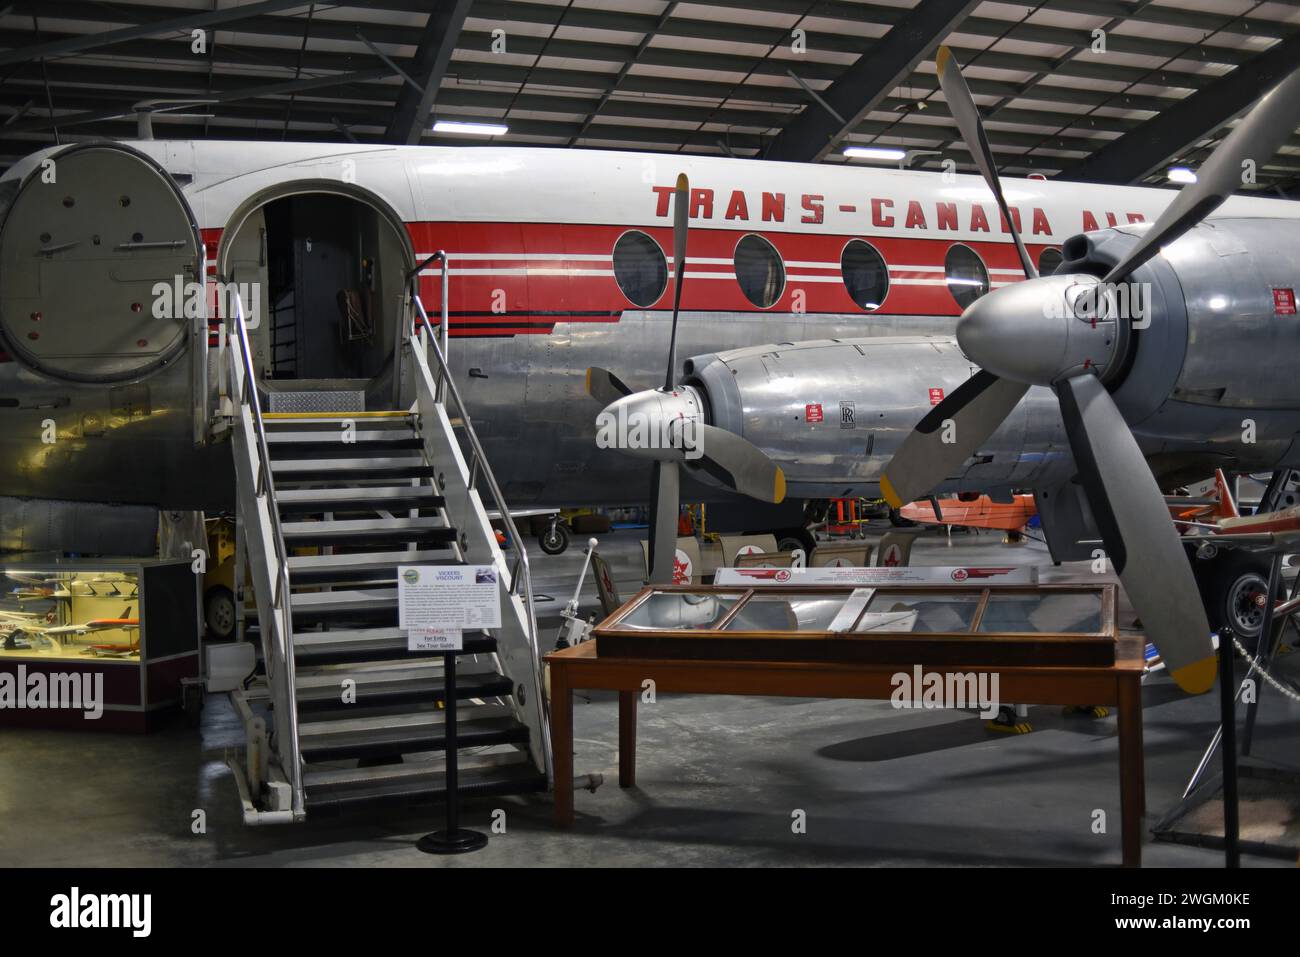 Vintage Vickers Viscount aircraft on display at the British Columbia Aviation Museum in Sidney, British Columbia Stock Photo